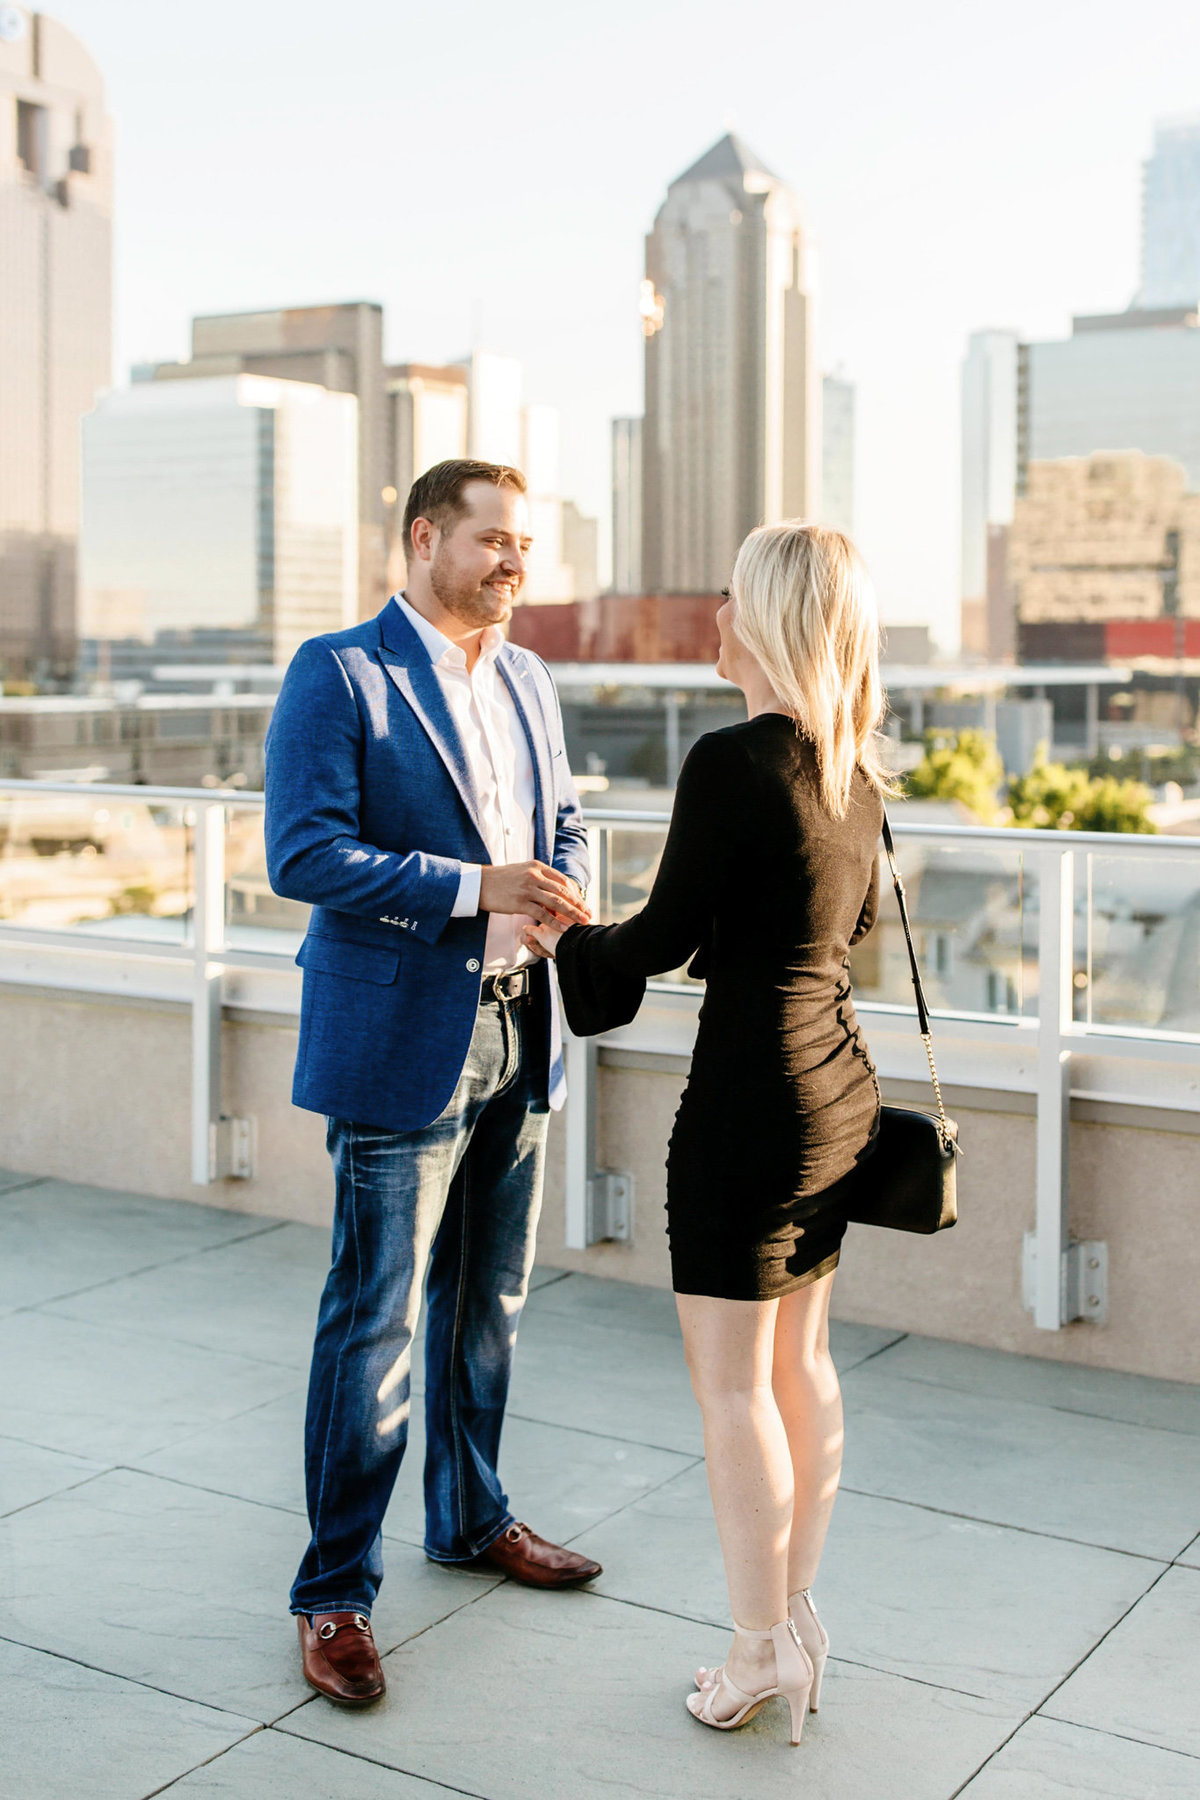 Eric & Megan - Downtown Dallas Rooftop Proposal & Engagement Session-21